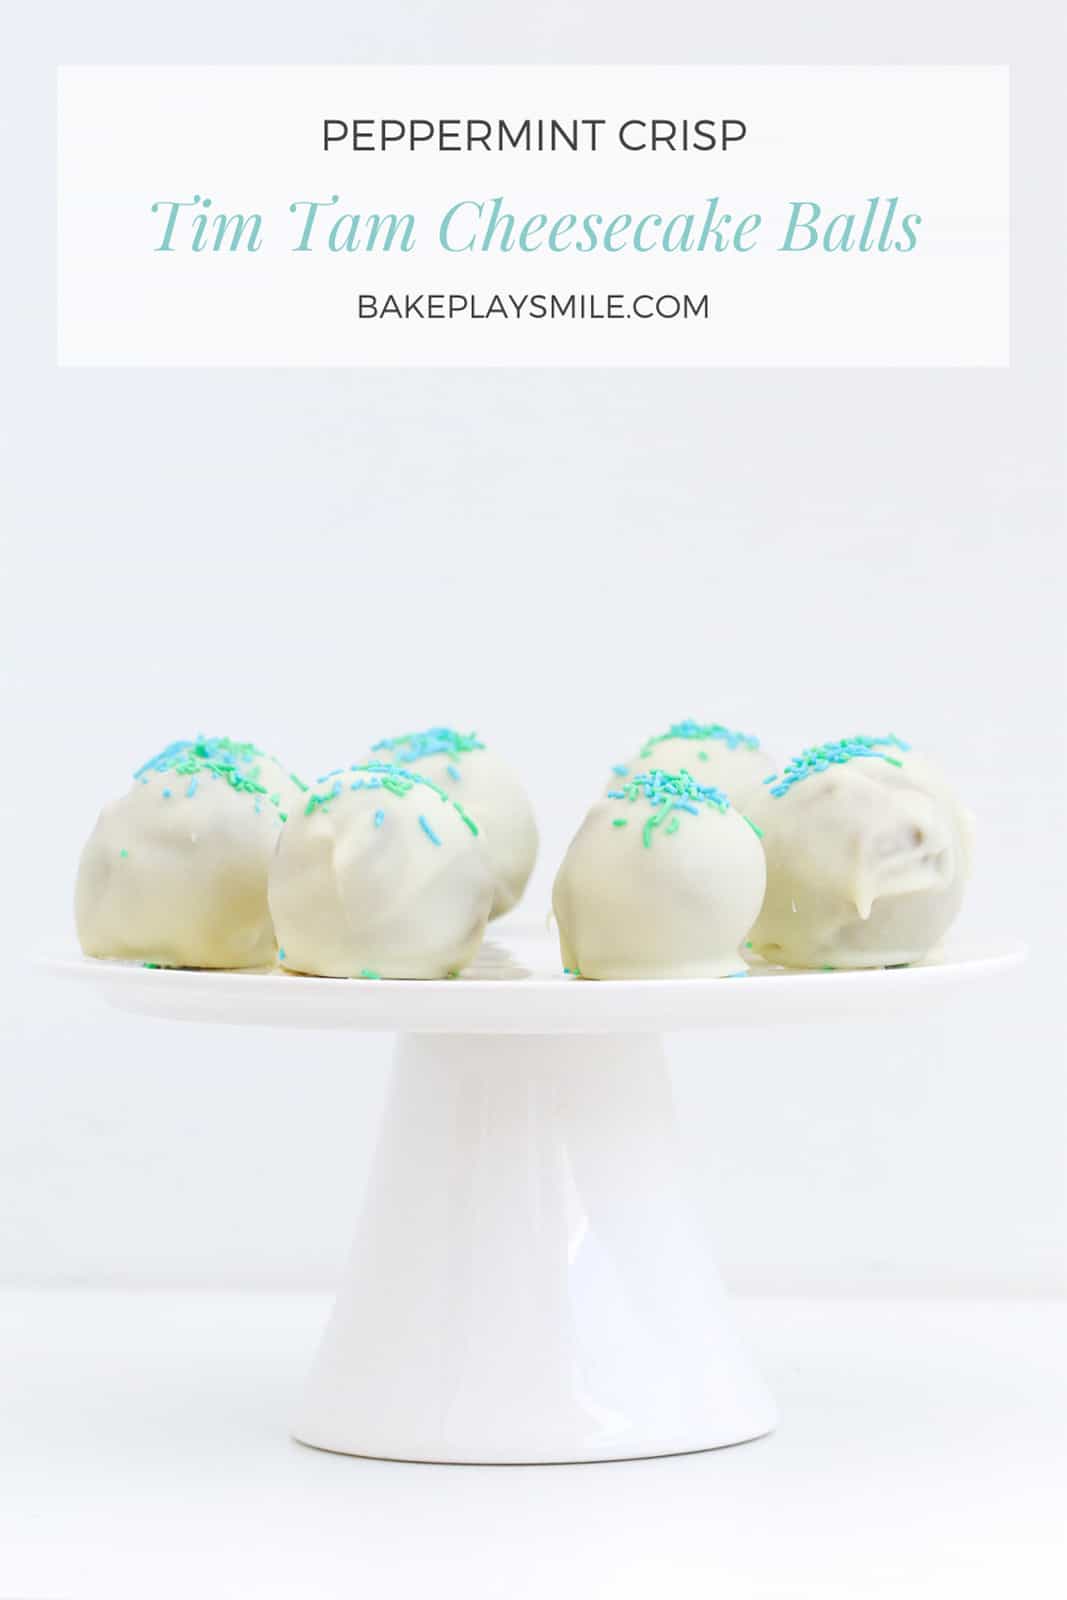 Peppermint Crisp Tim Tam balls decorated with green sprinkles on a white cake stand